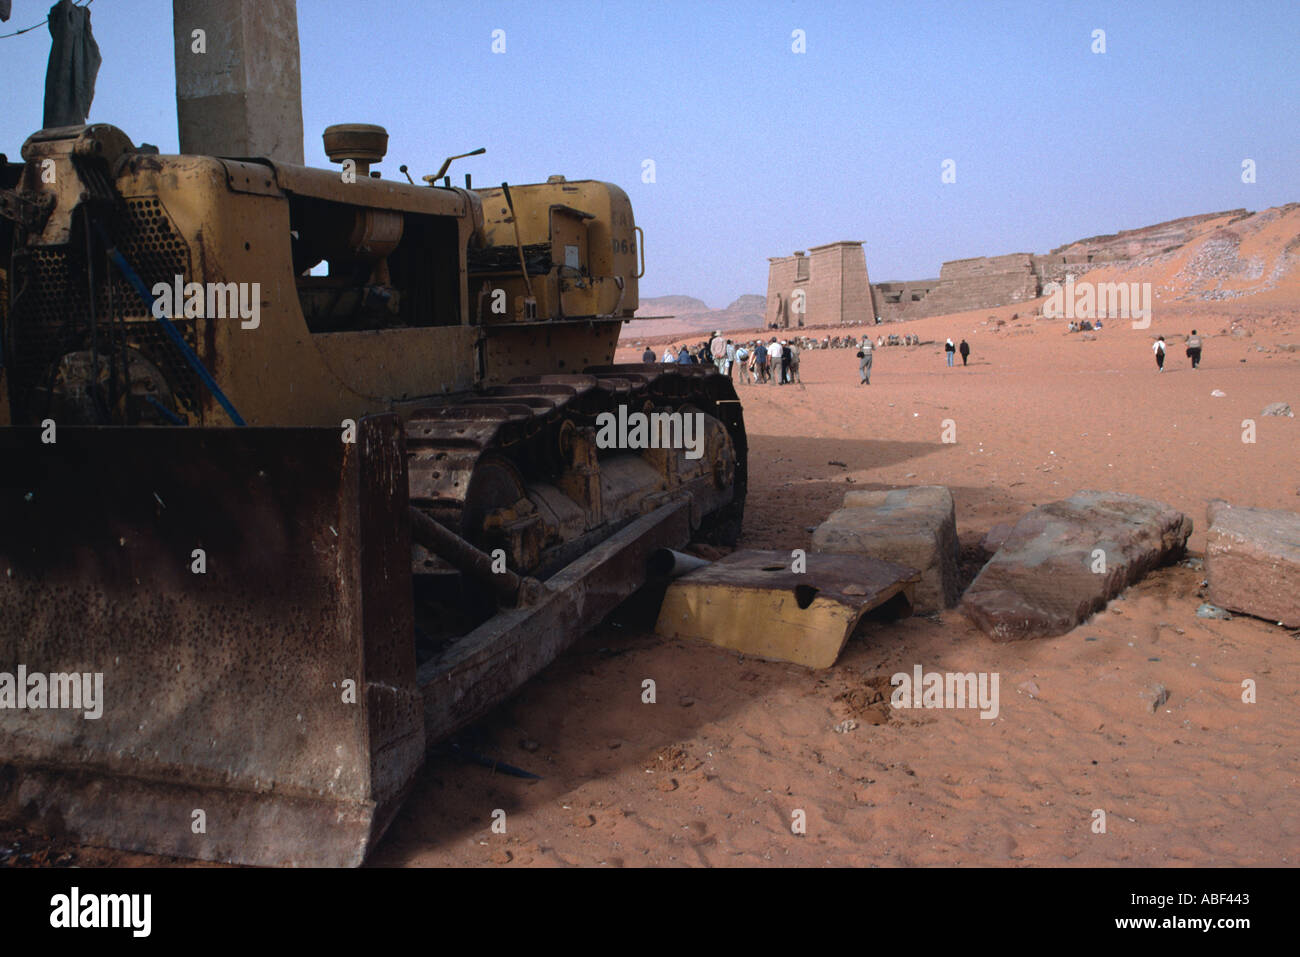 An old bulldozer. Wadi al-Sebua, New Sebua, Upper Egypt, Egypt. When the archeological sites were moved from the rising waters of Lake Nasser, one item of equipment was left at each location as a reminder of the the work that took place. This is in front of Wadi-el-sebua, one of Ramses II's temples. Stock Photo